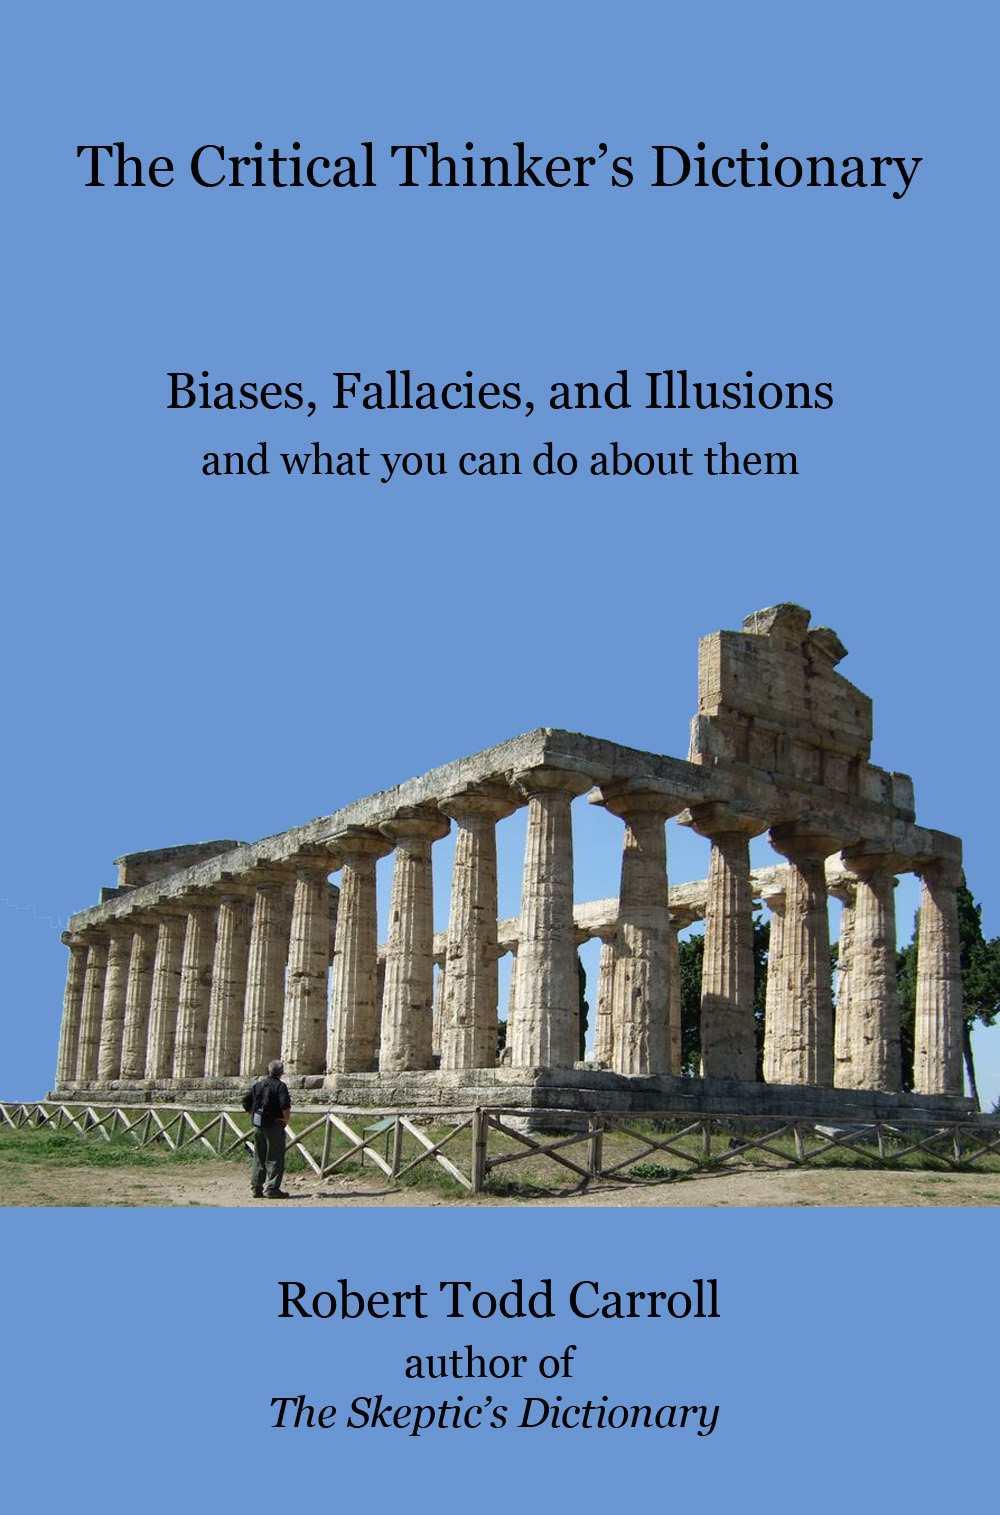 The Critical Thinker's Dictionary: Biases, Fallacies, and Illusions and What You Can Do About Them